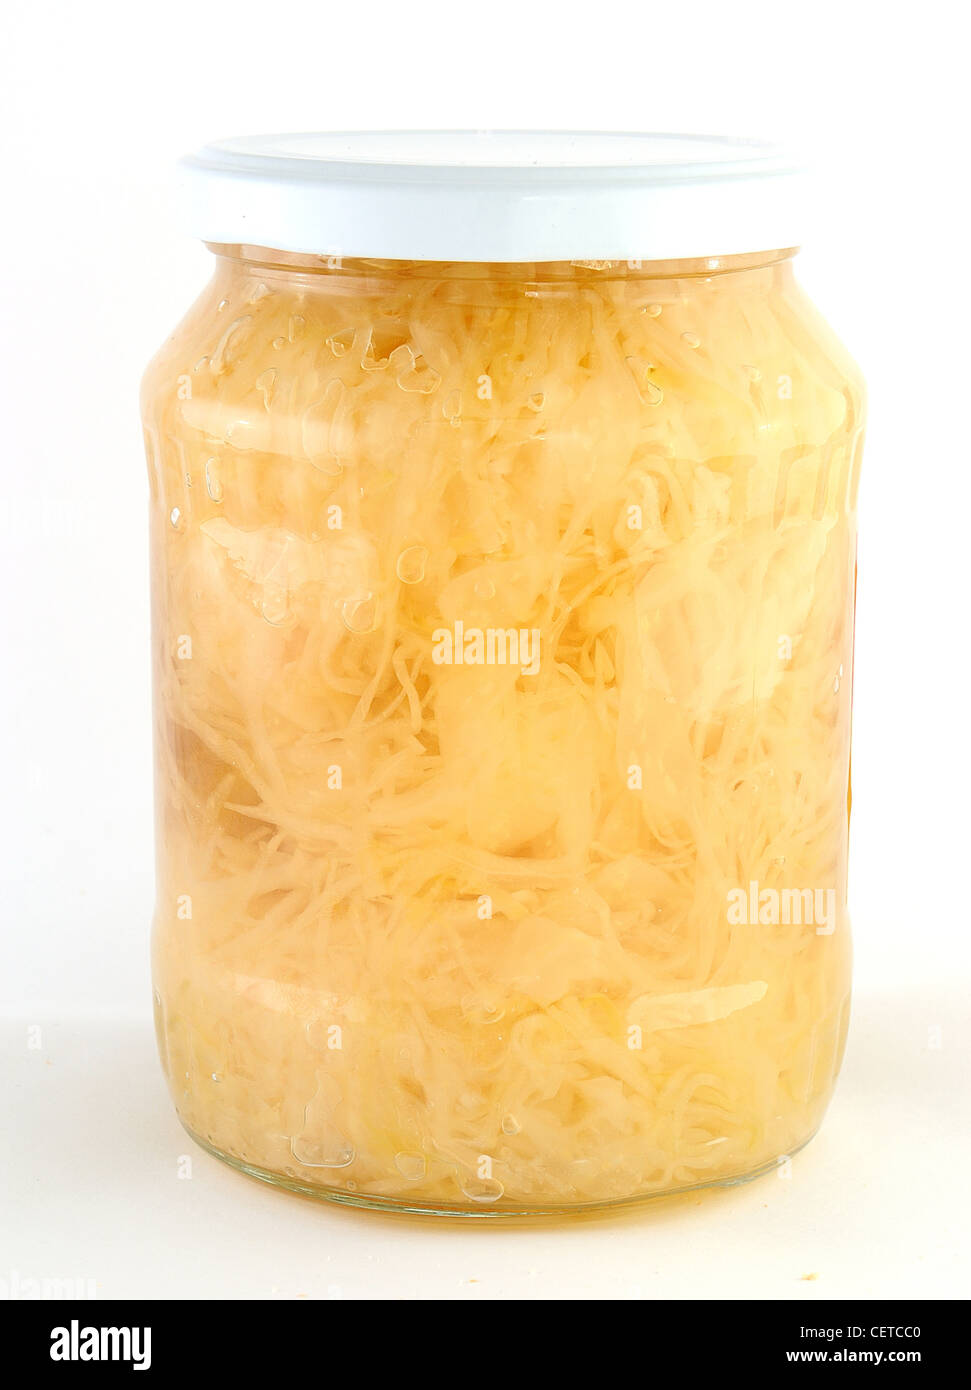 Cabbage jamed to the jar with white lid. Stock Photo